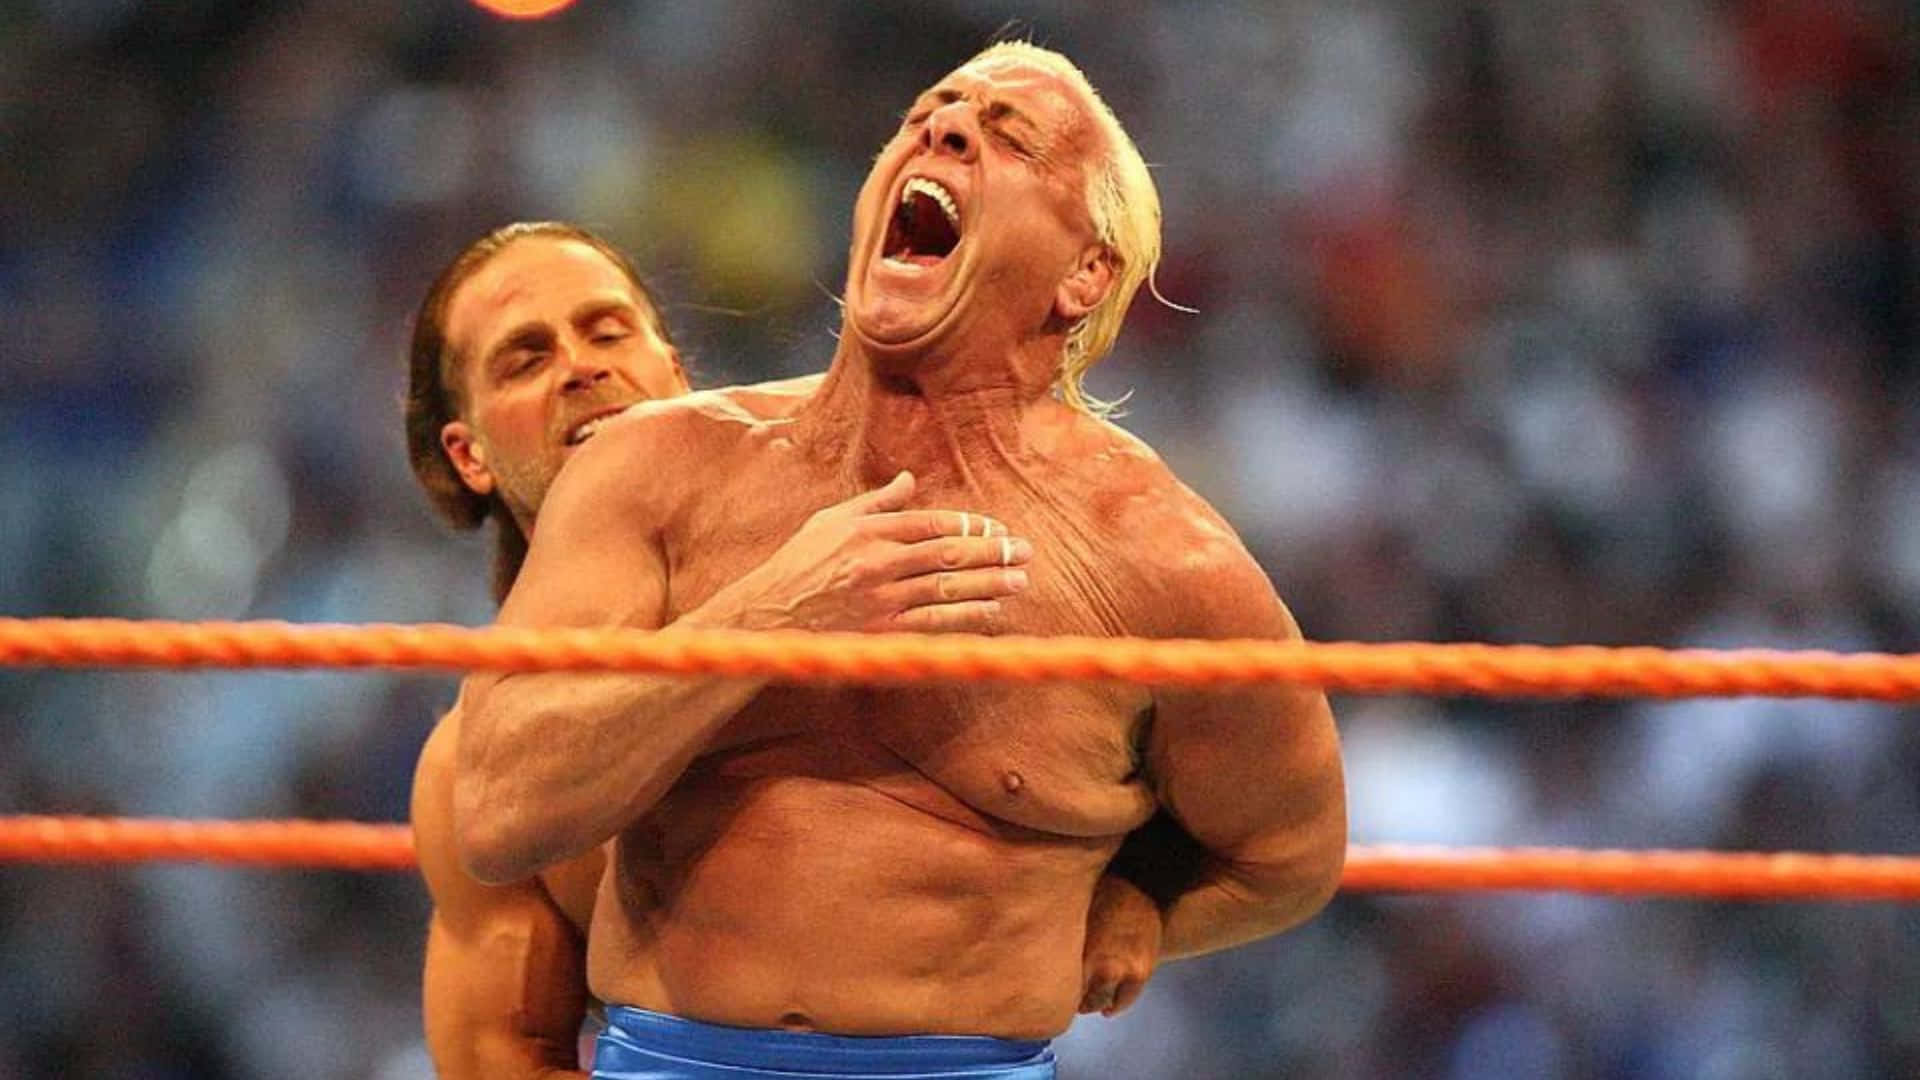 Ric Flair With Shawn Michaels Wrestlemania 24 Background